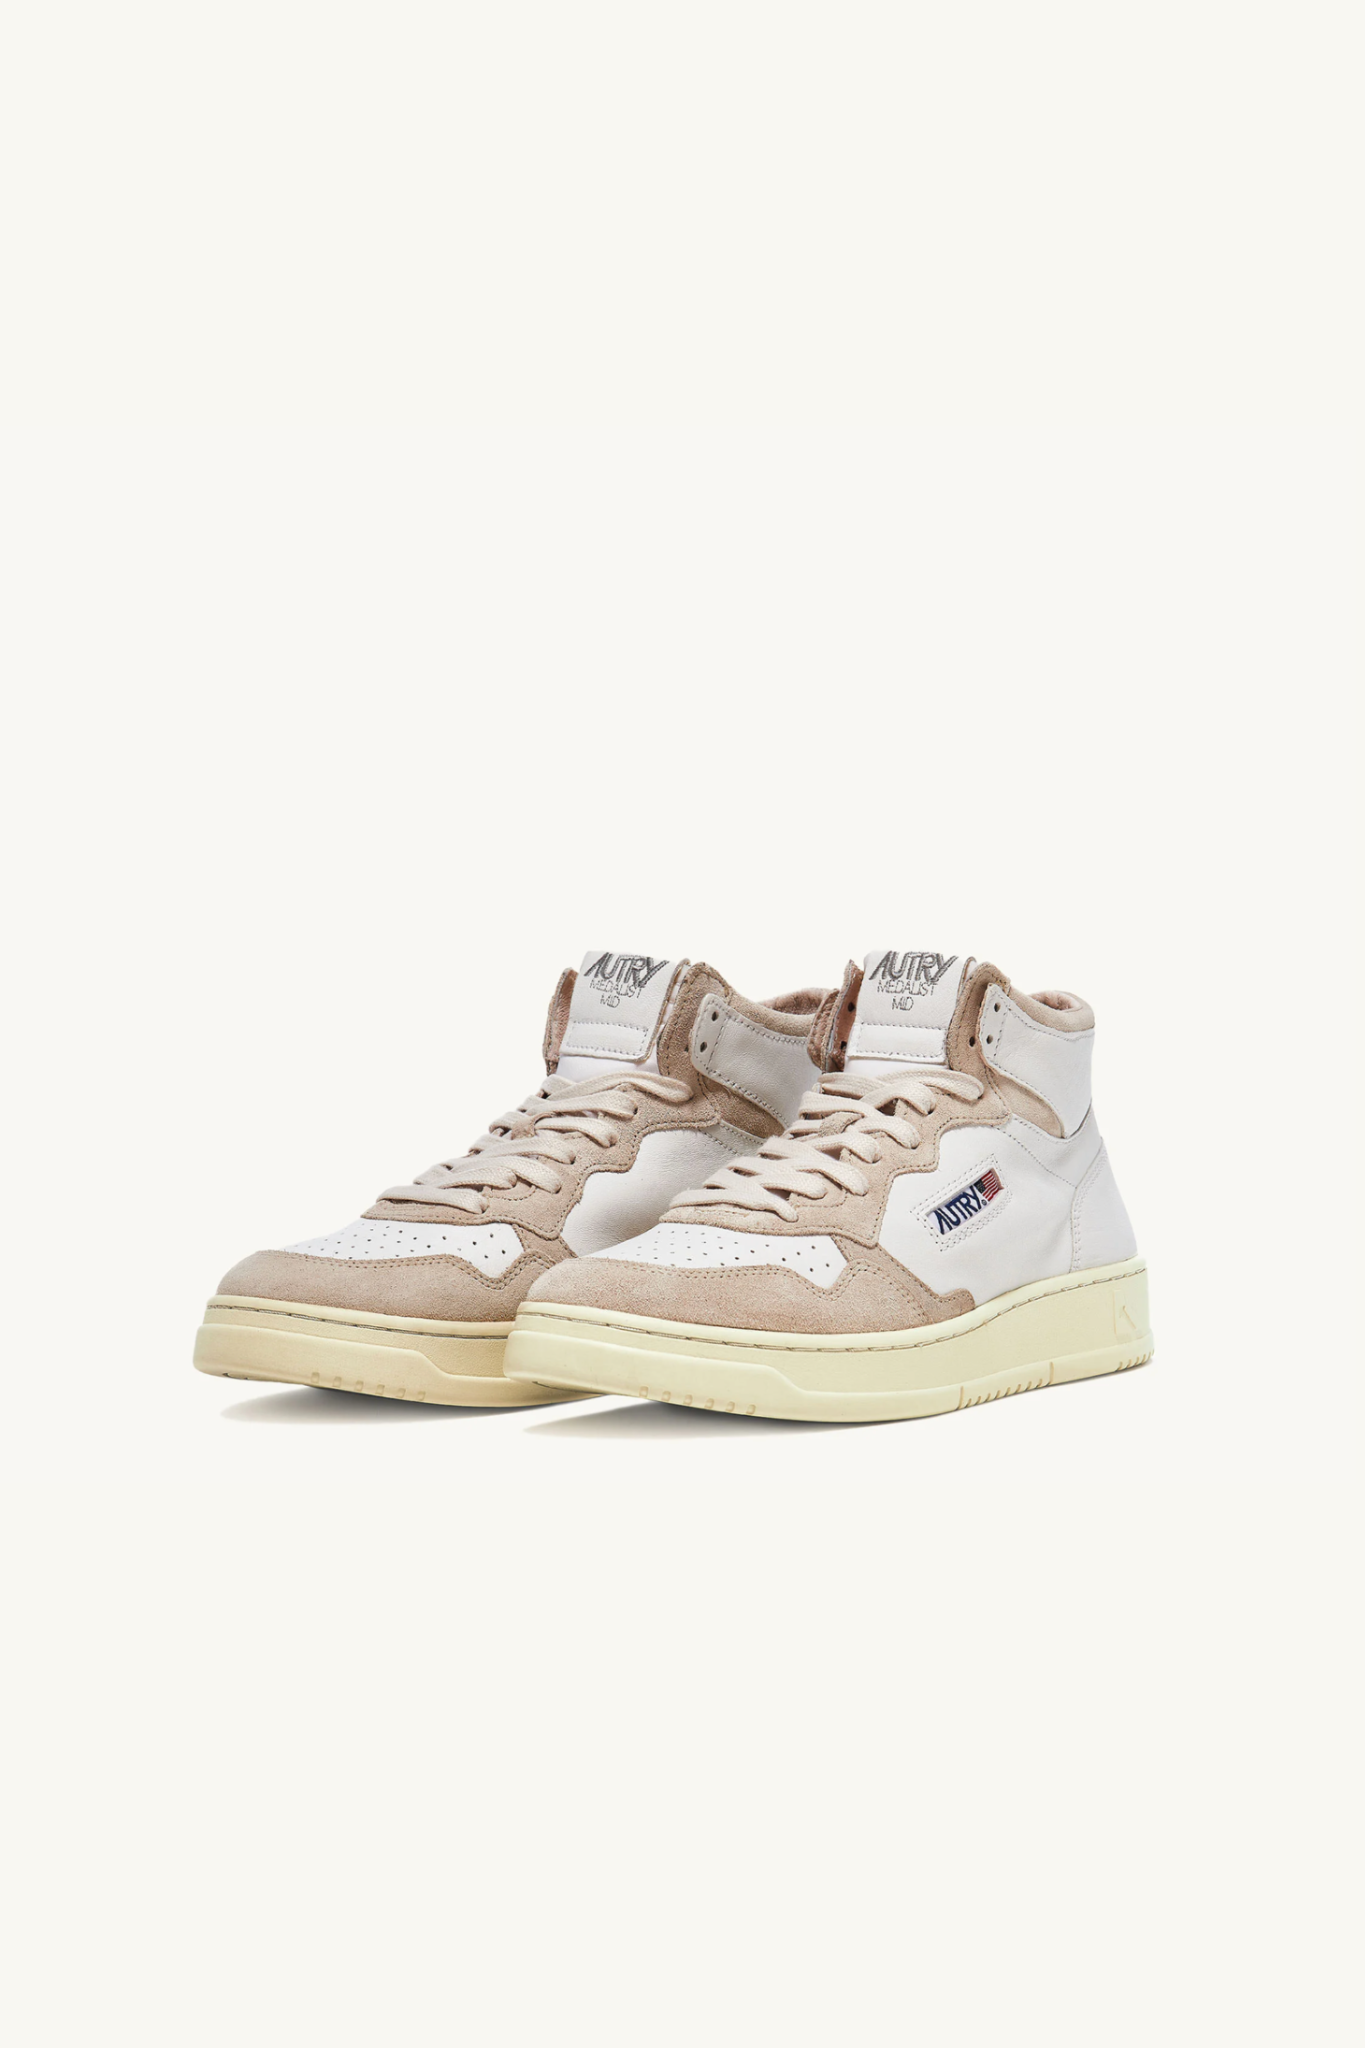 AUMM-GS04 - MEDALIST MID SNEAKERS IN WHITE GOATSKIN AND SUEDE